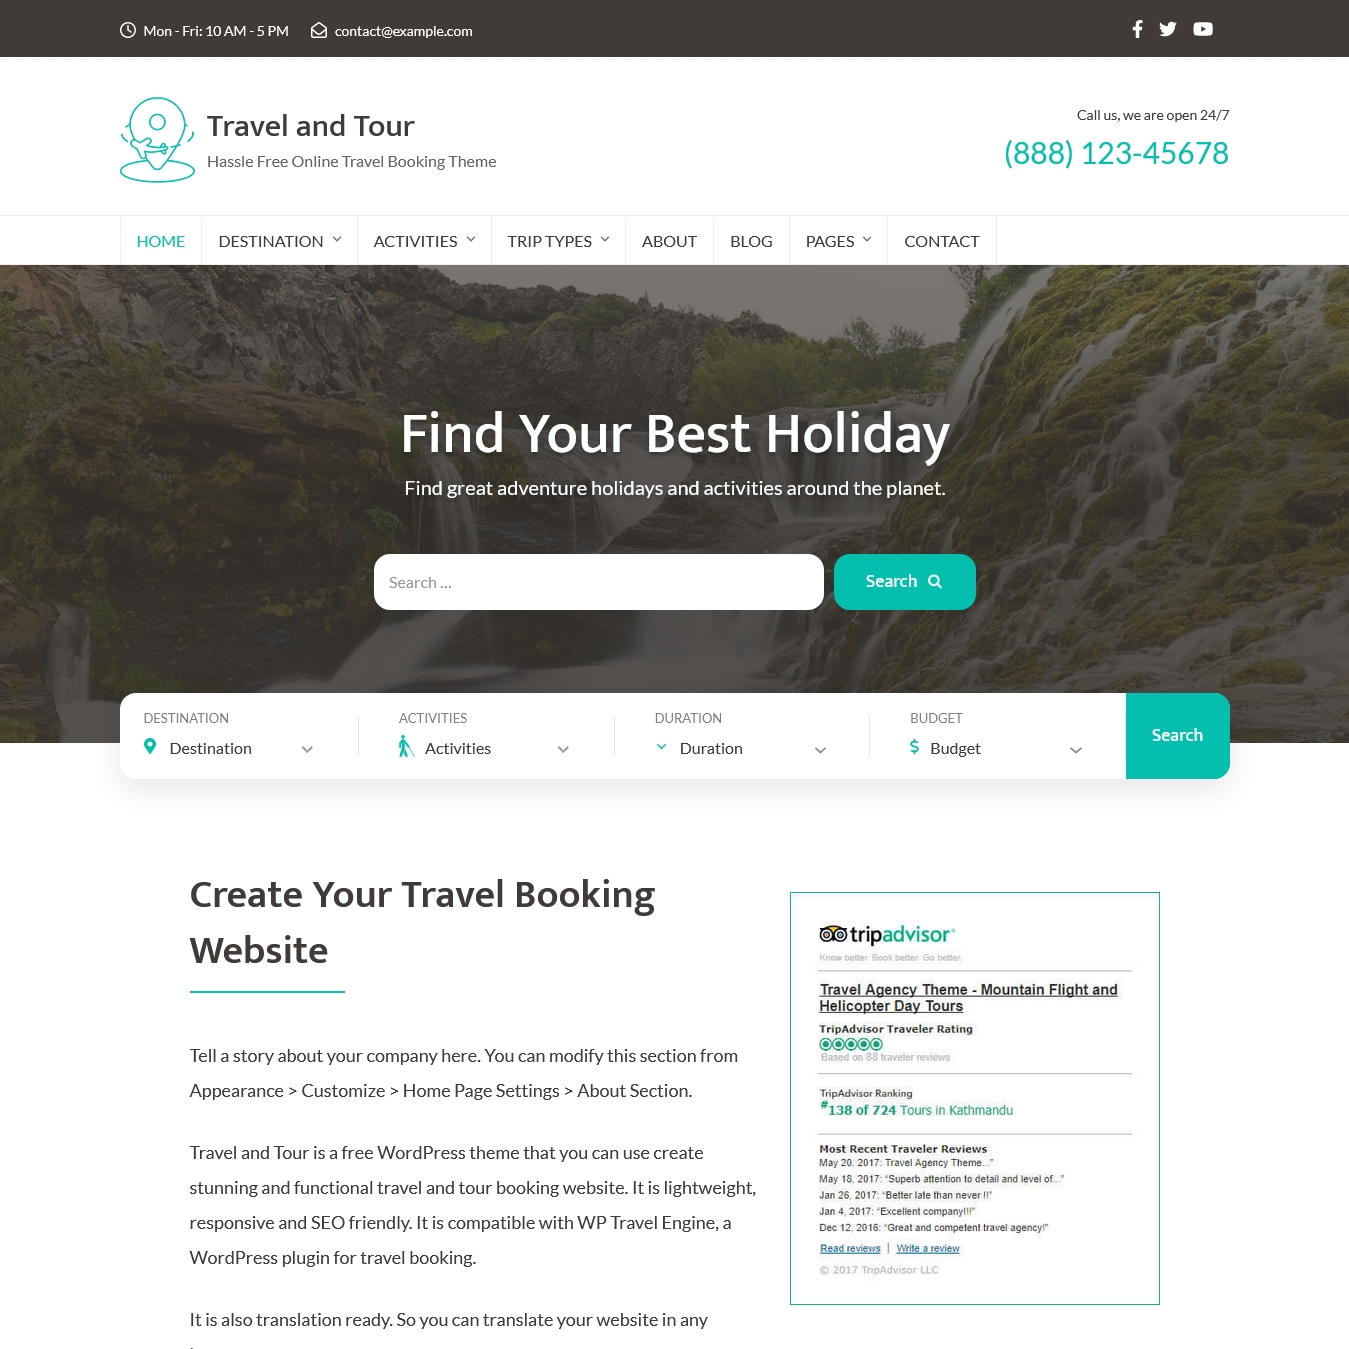 Travel and Tour Hassle Free Online Travel Booking Theme